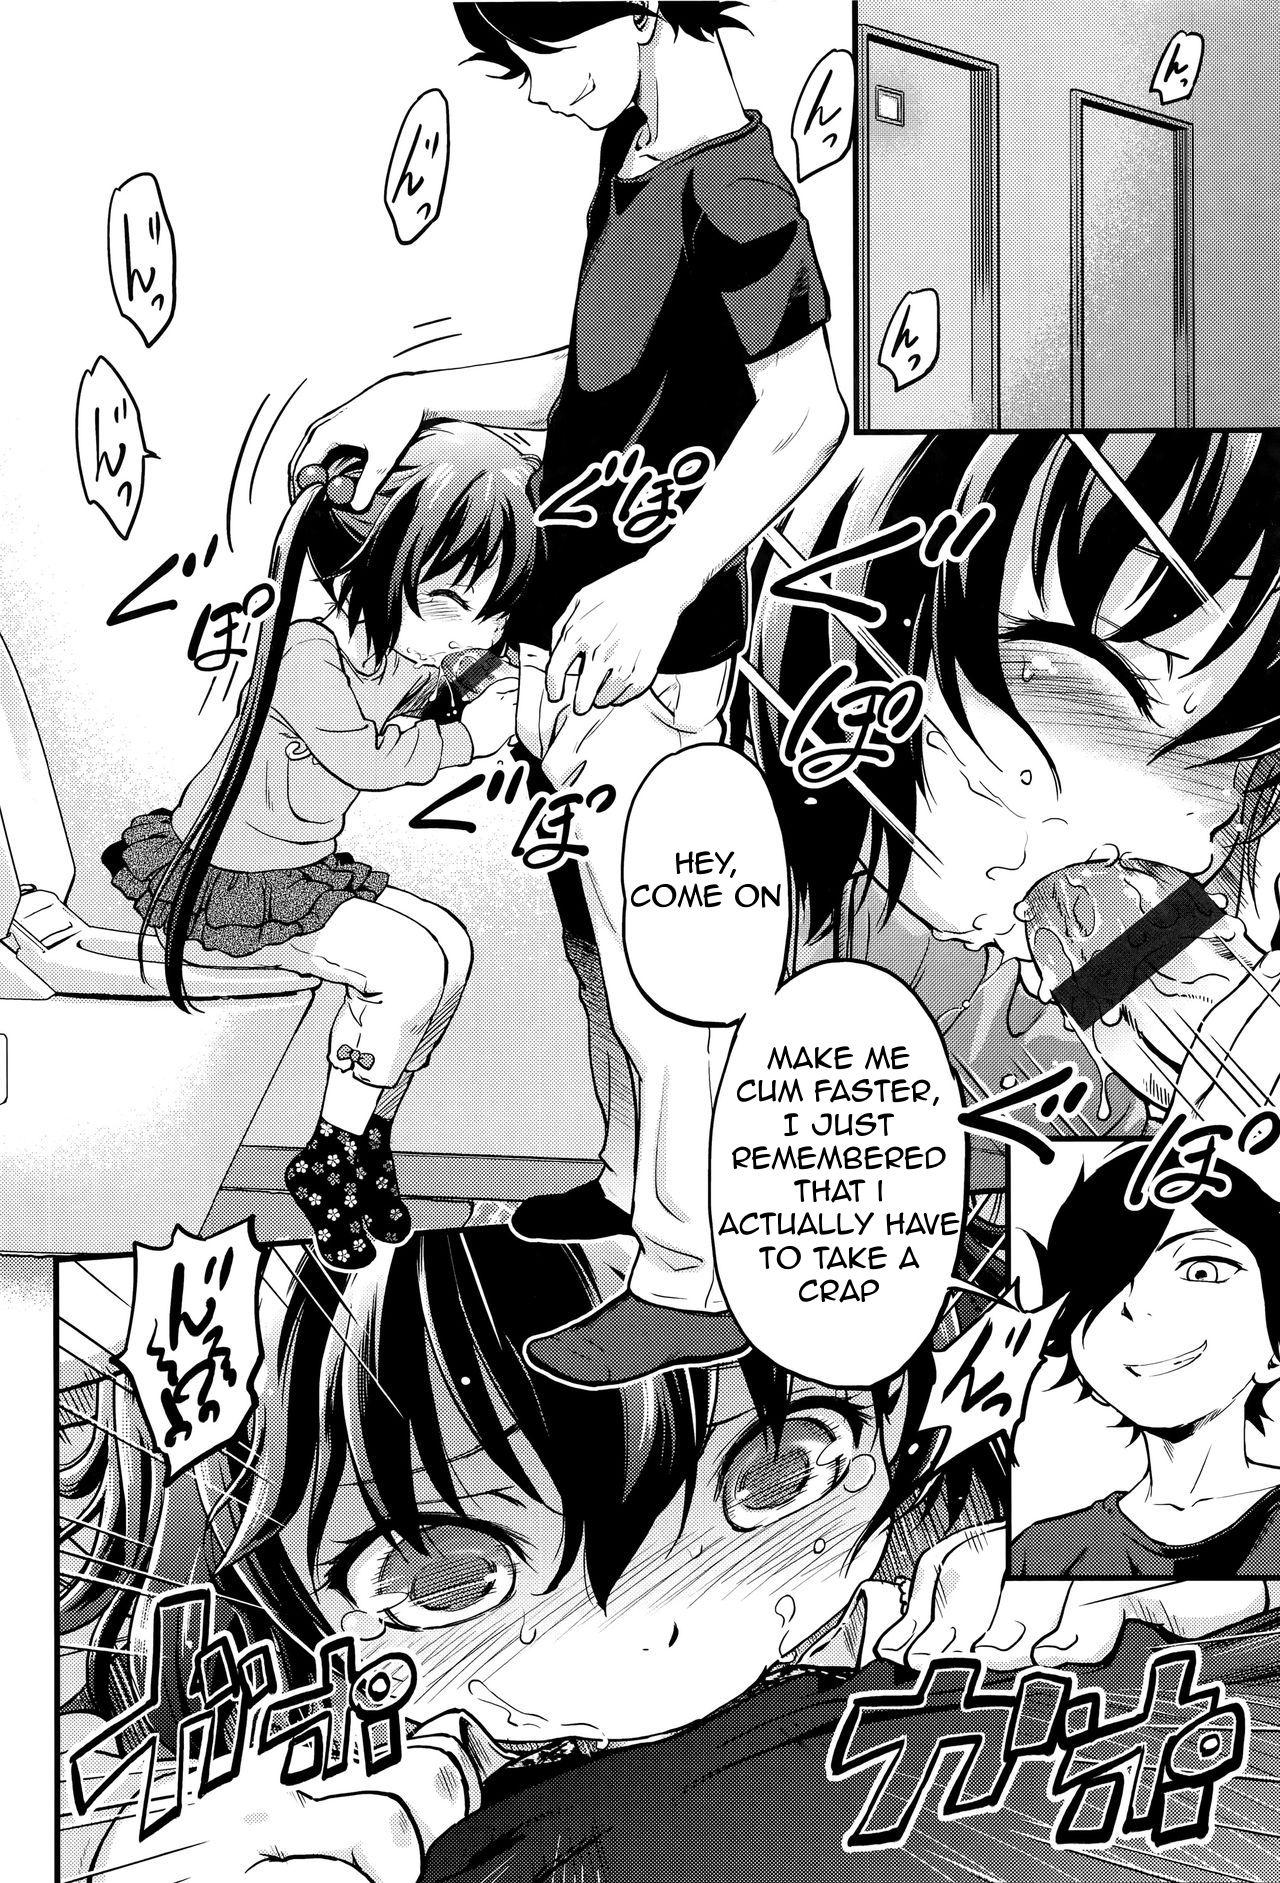 Gaygroupsex Tomodachi no Imouto no Tomodachi. | My Friend's Little Sister's Friend. Sucking Cock - Page 4